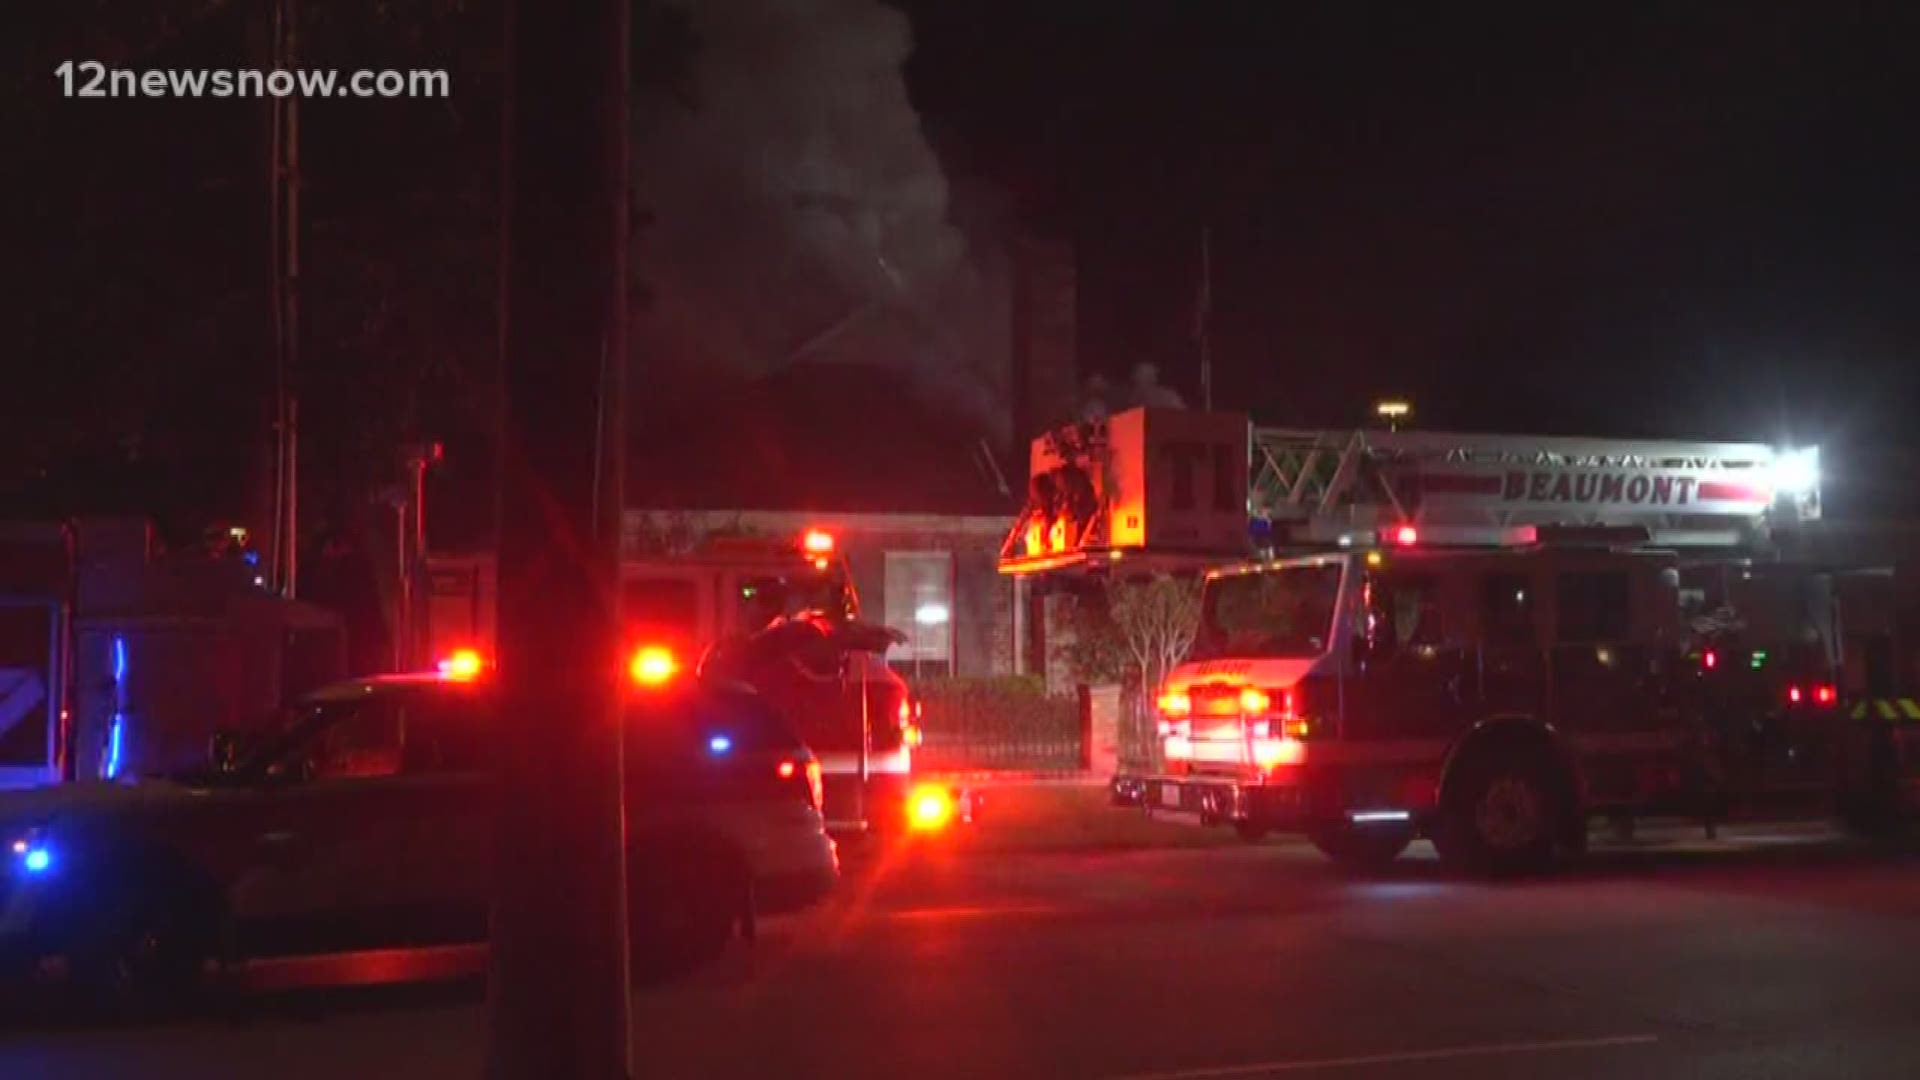 Captain Jimmy Blanchard confirmed it was an electrical fire. The department responded just before six Wednesday night.